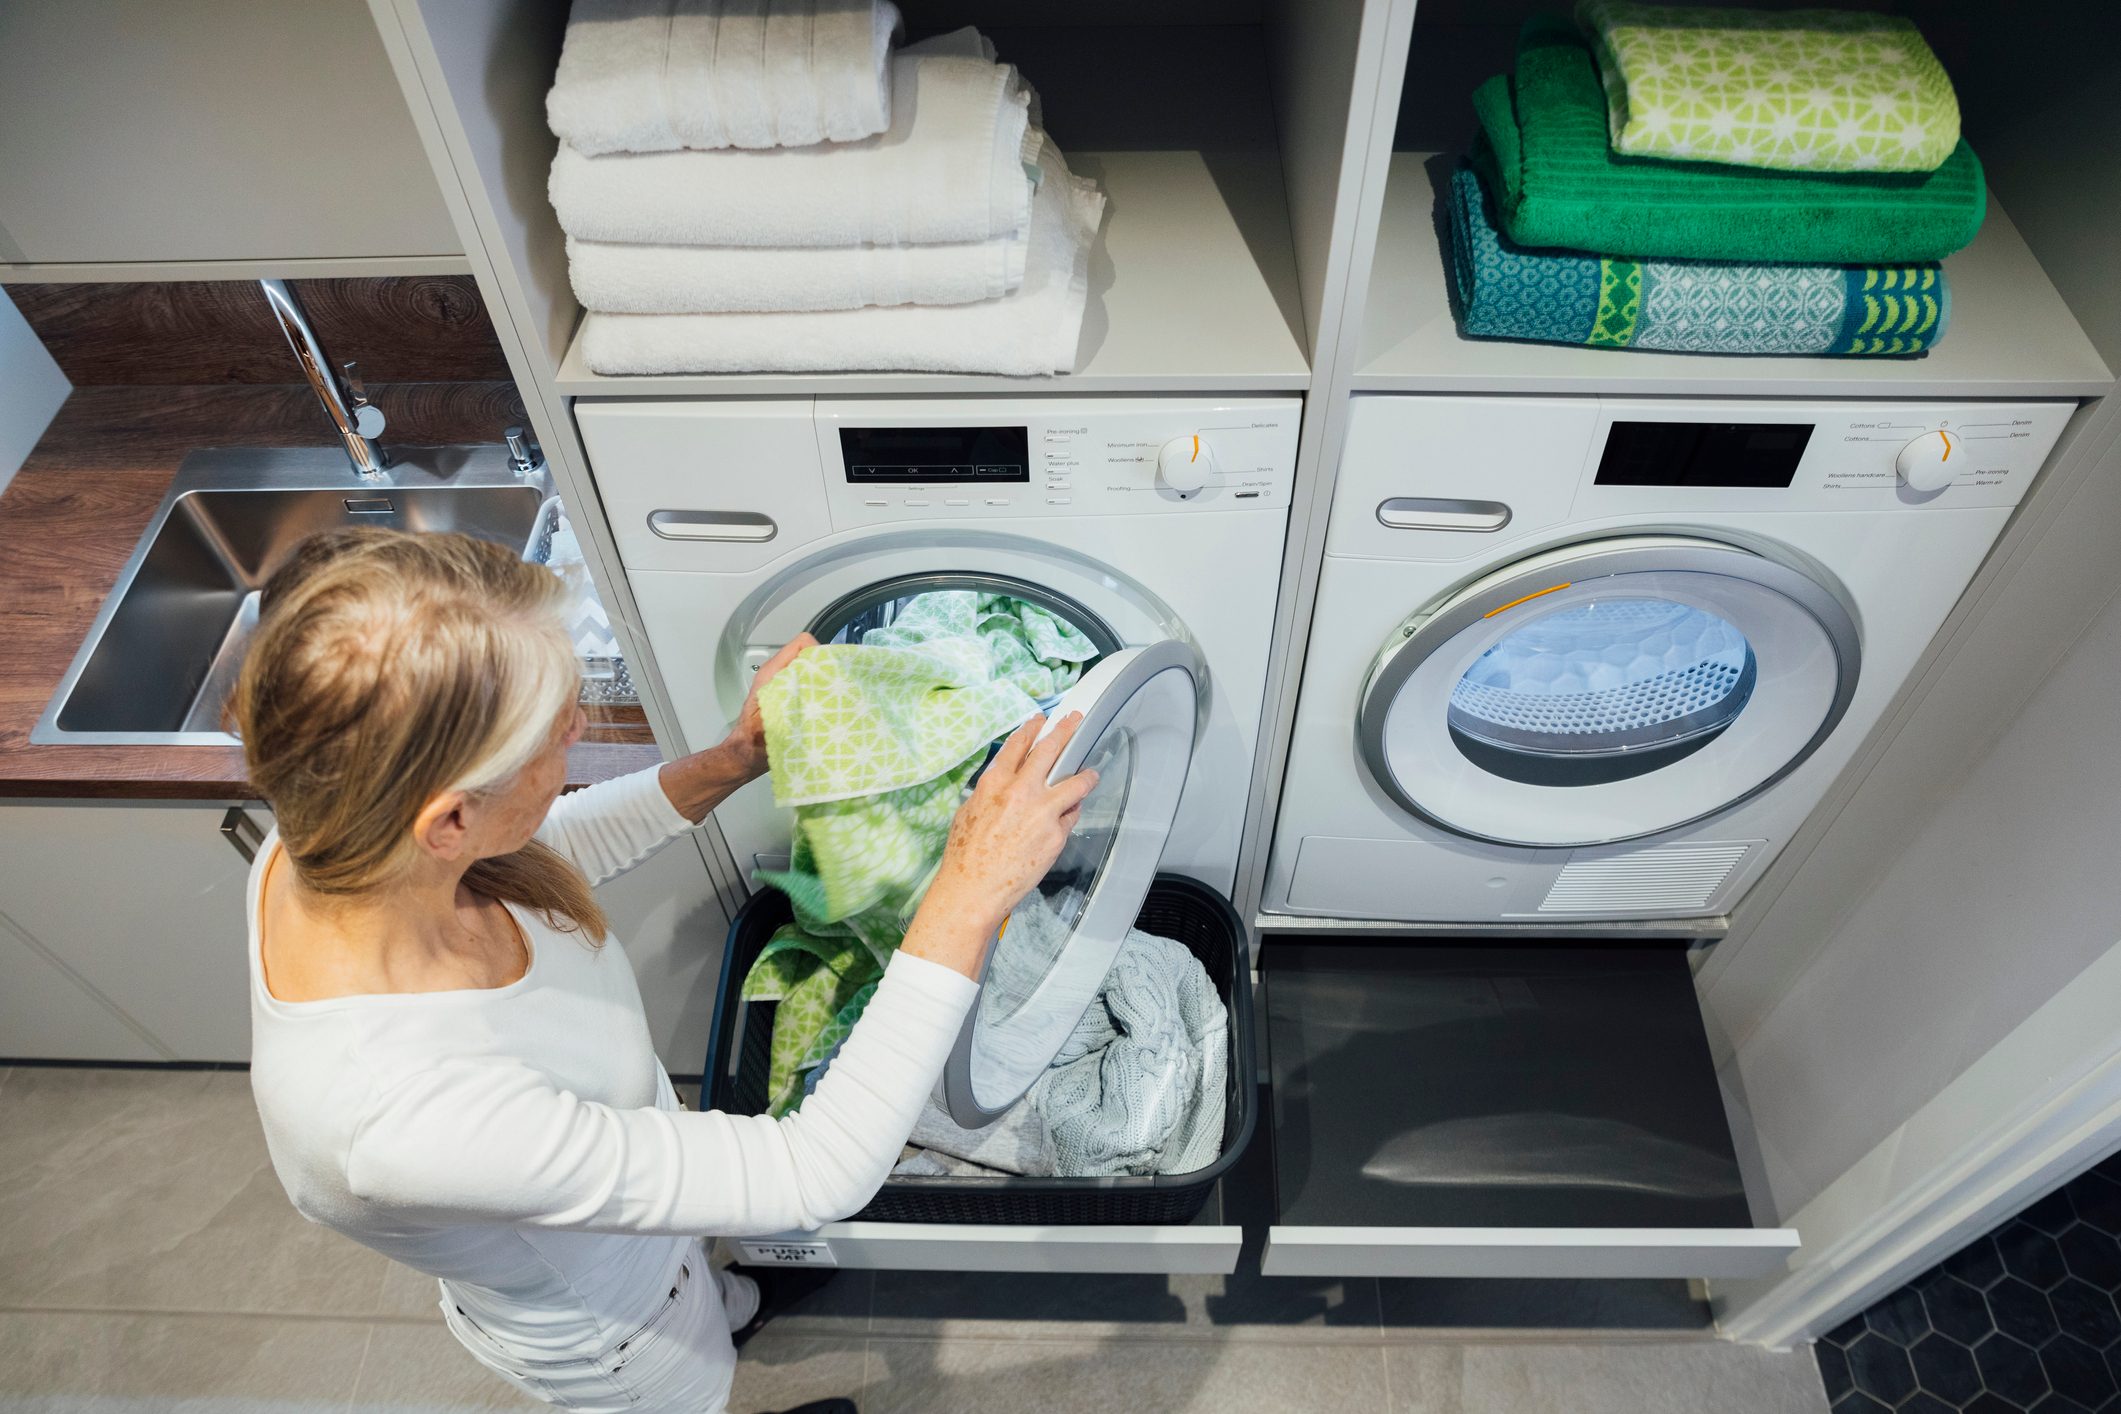 Active Network properties: Keep towels soft and fluffy